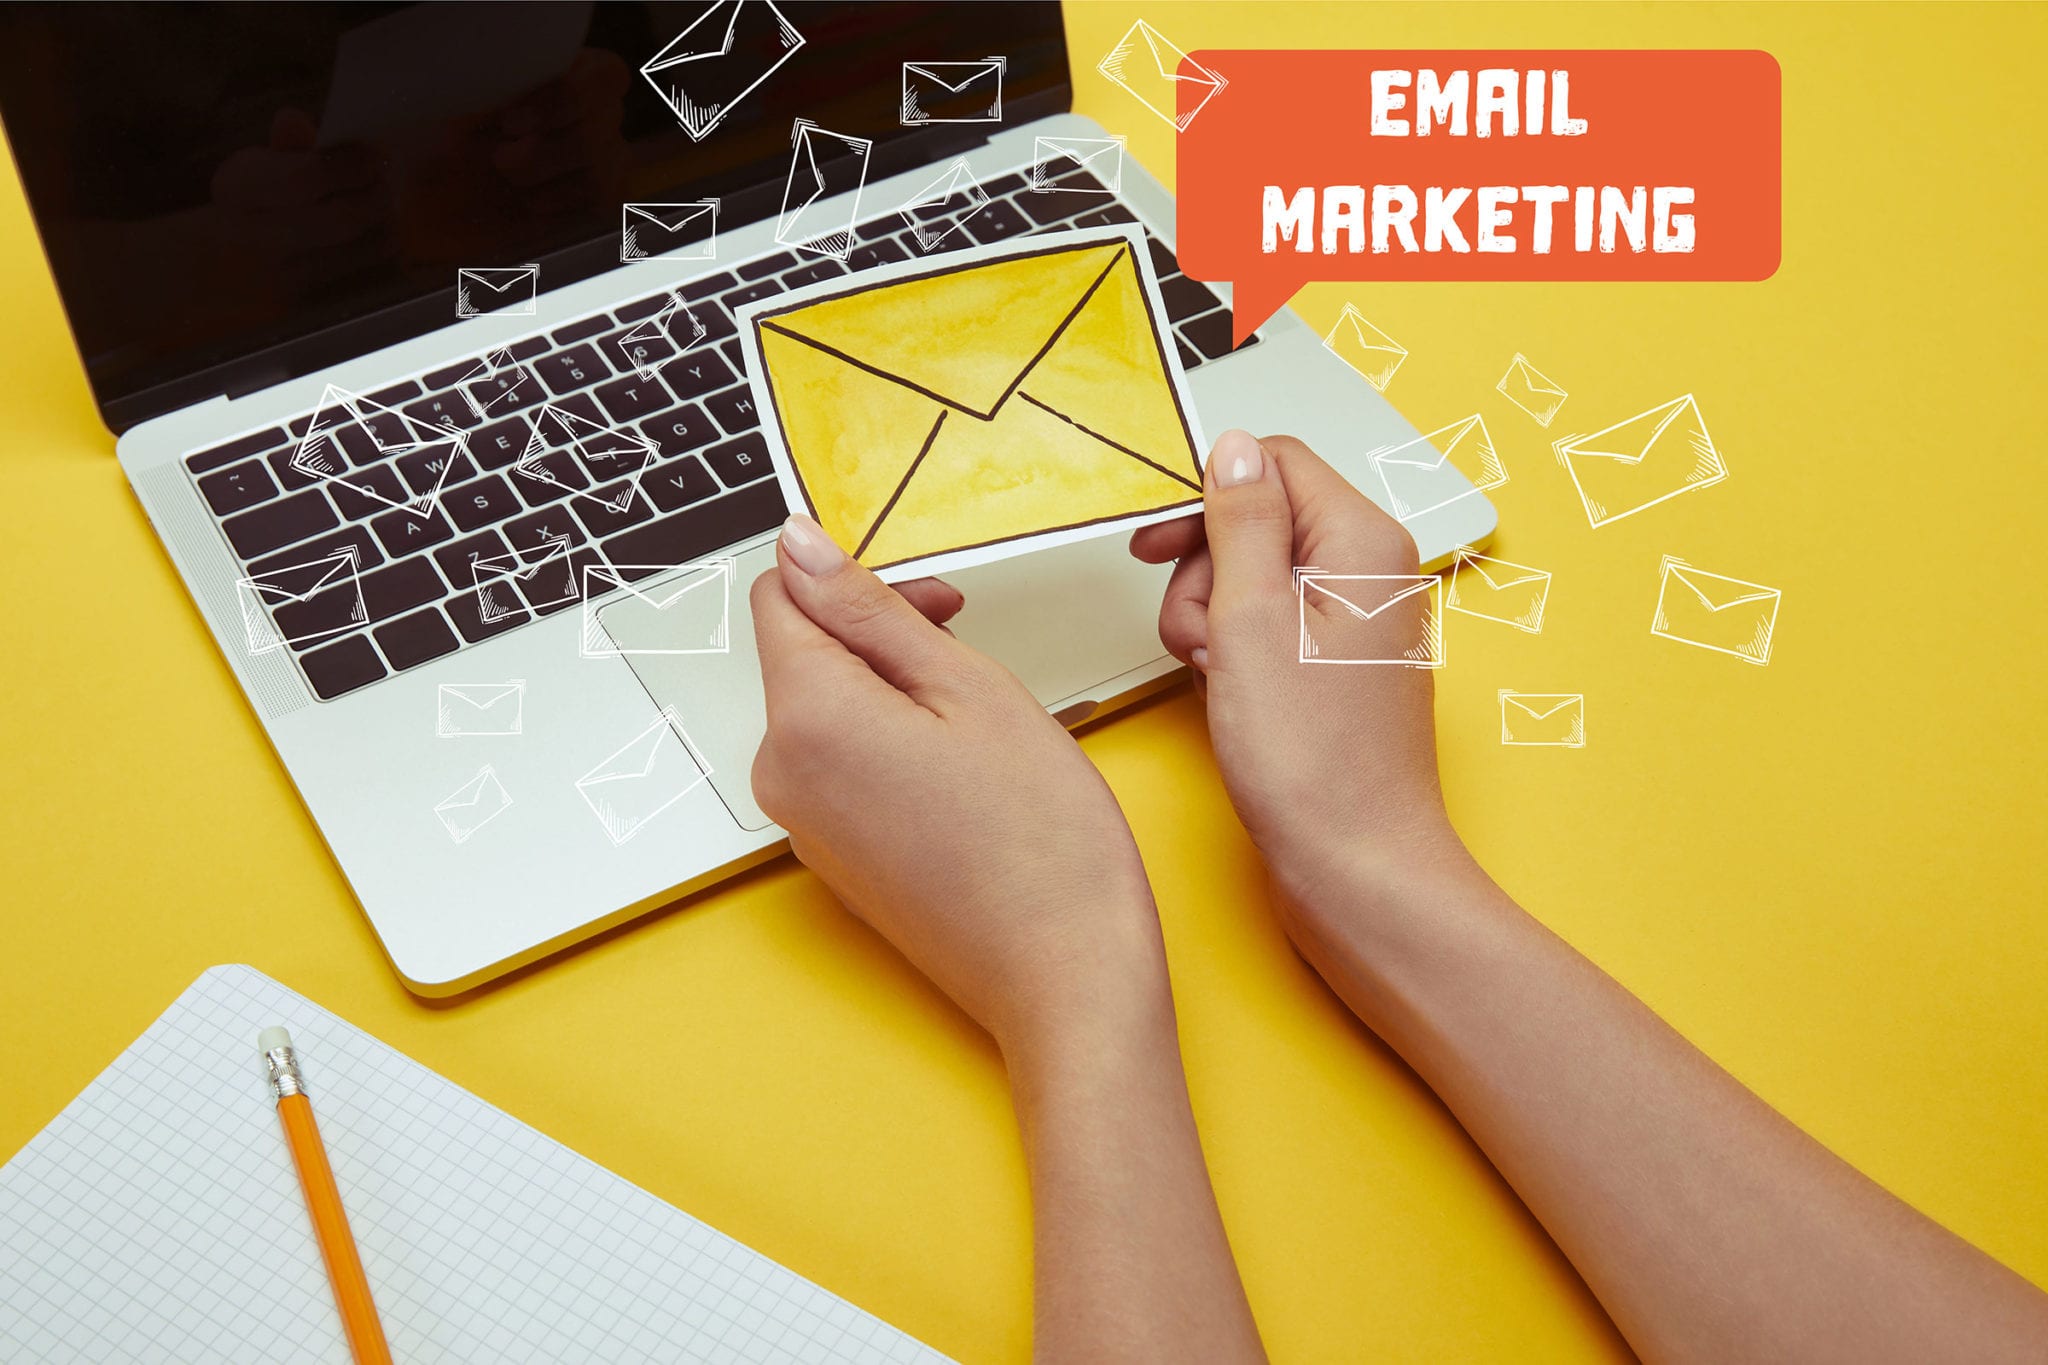 Improve the Effectiveness of Your Email Marketing